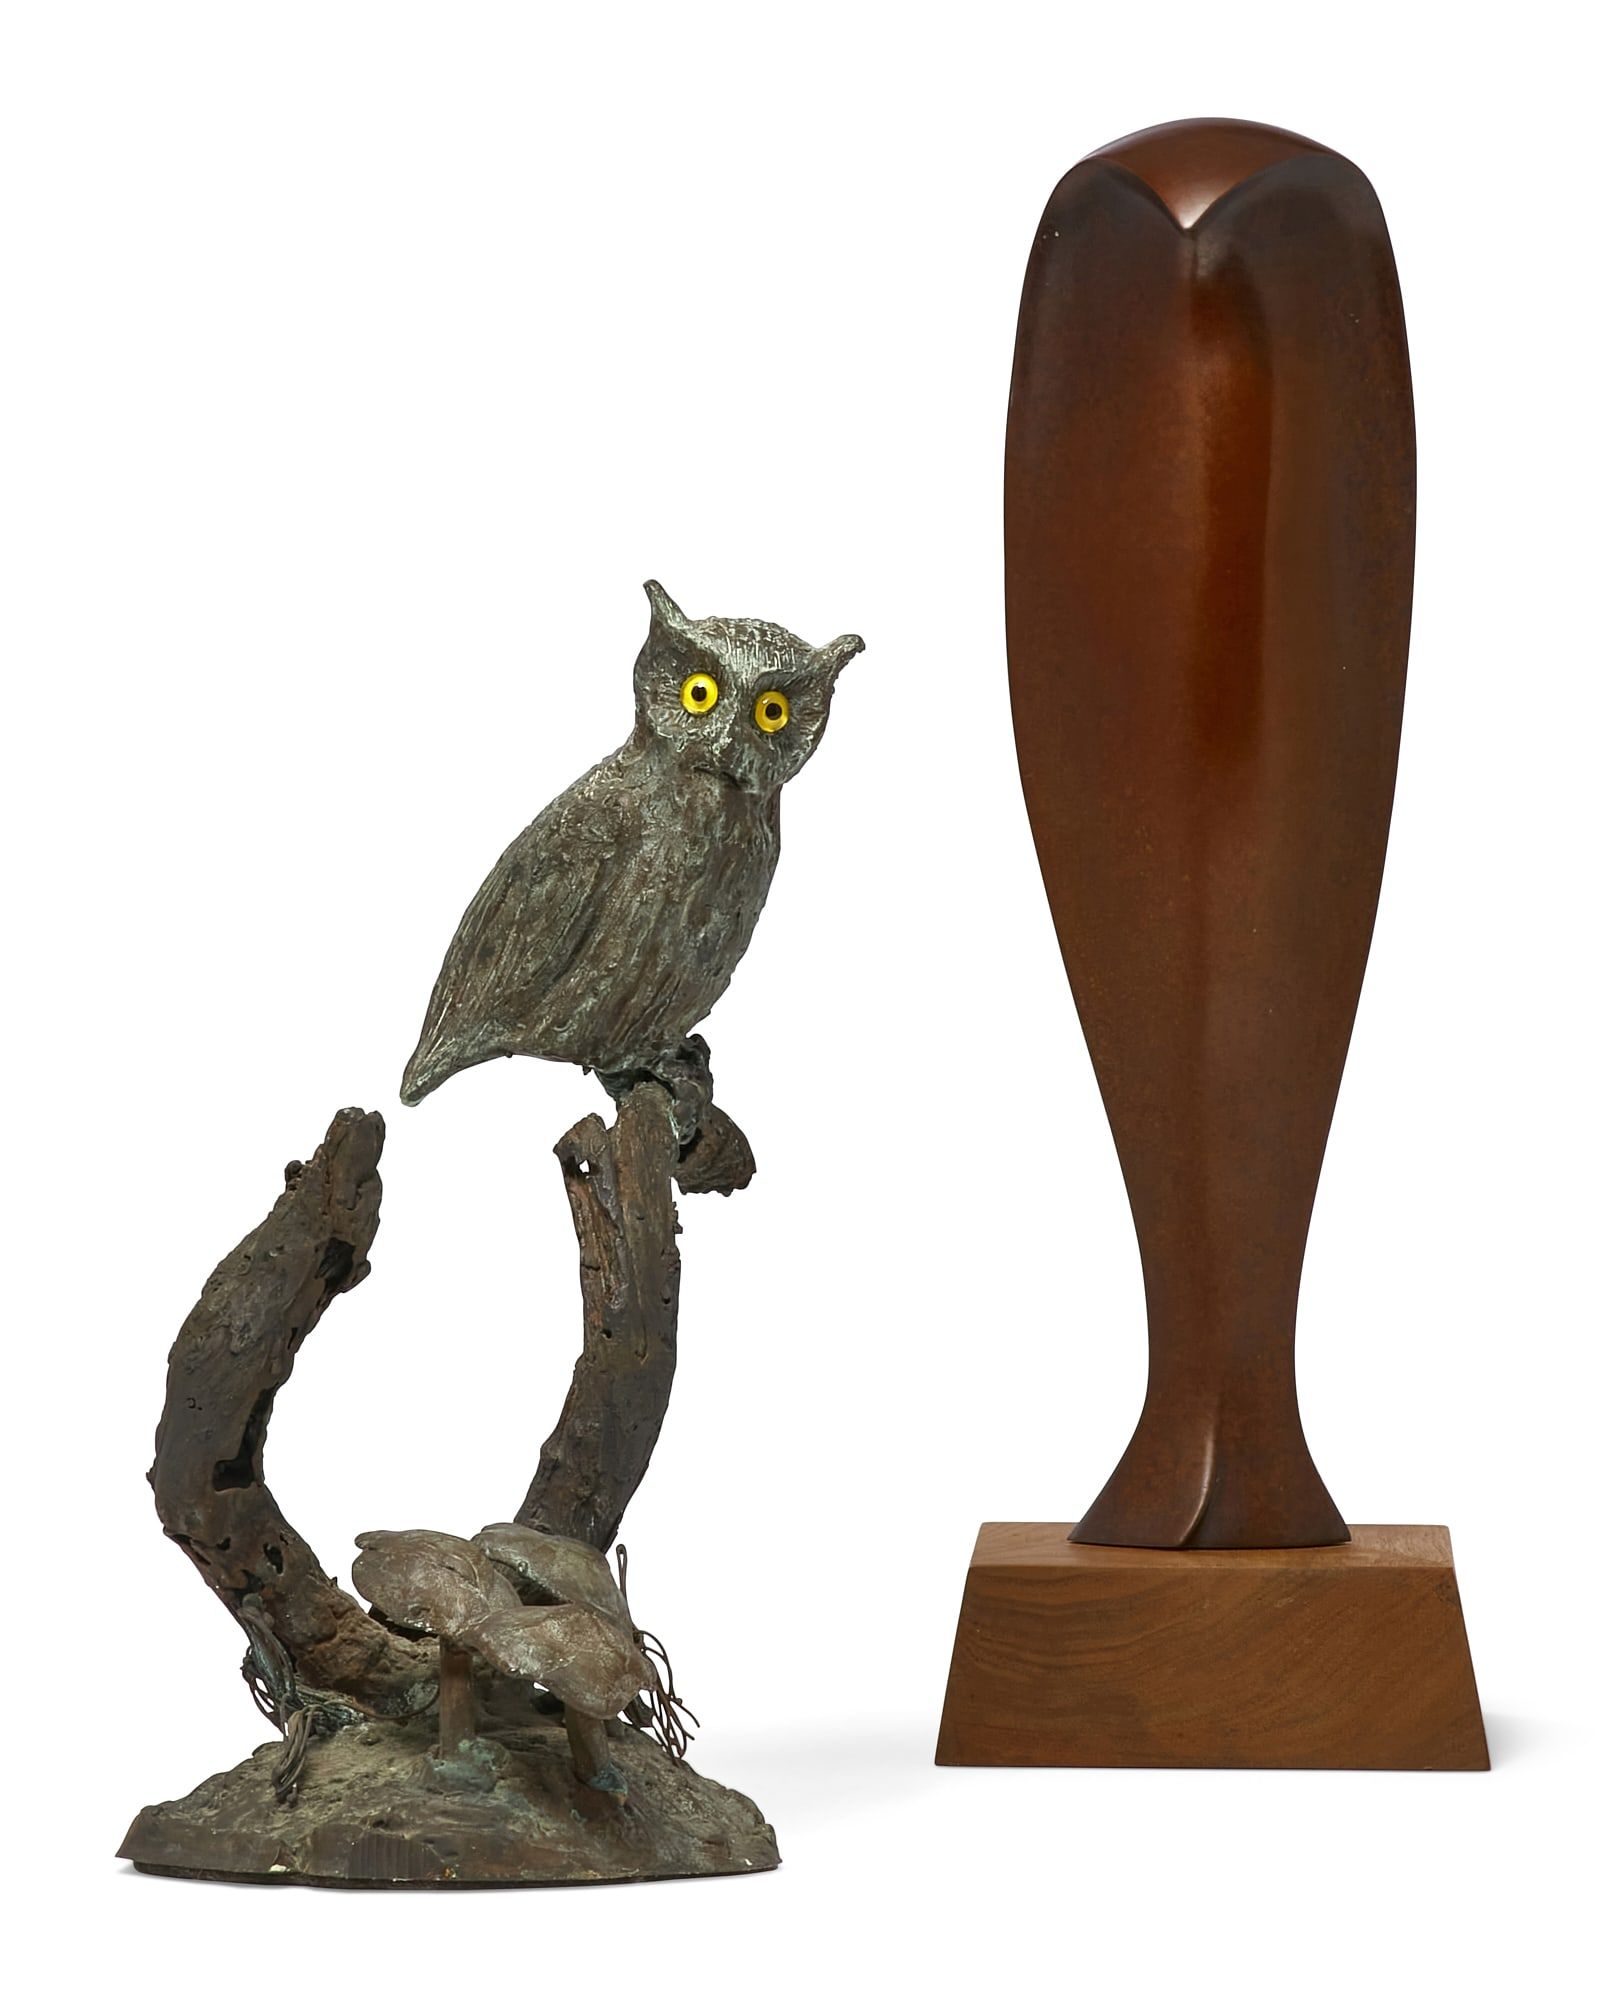 TWO BRONZE MODELS OF OWLS, 20TH CENTURYTwo